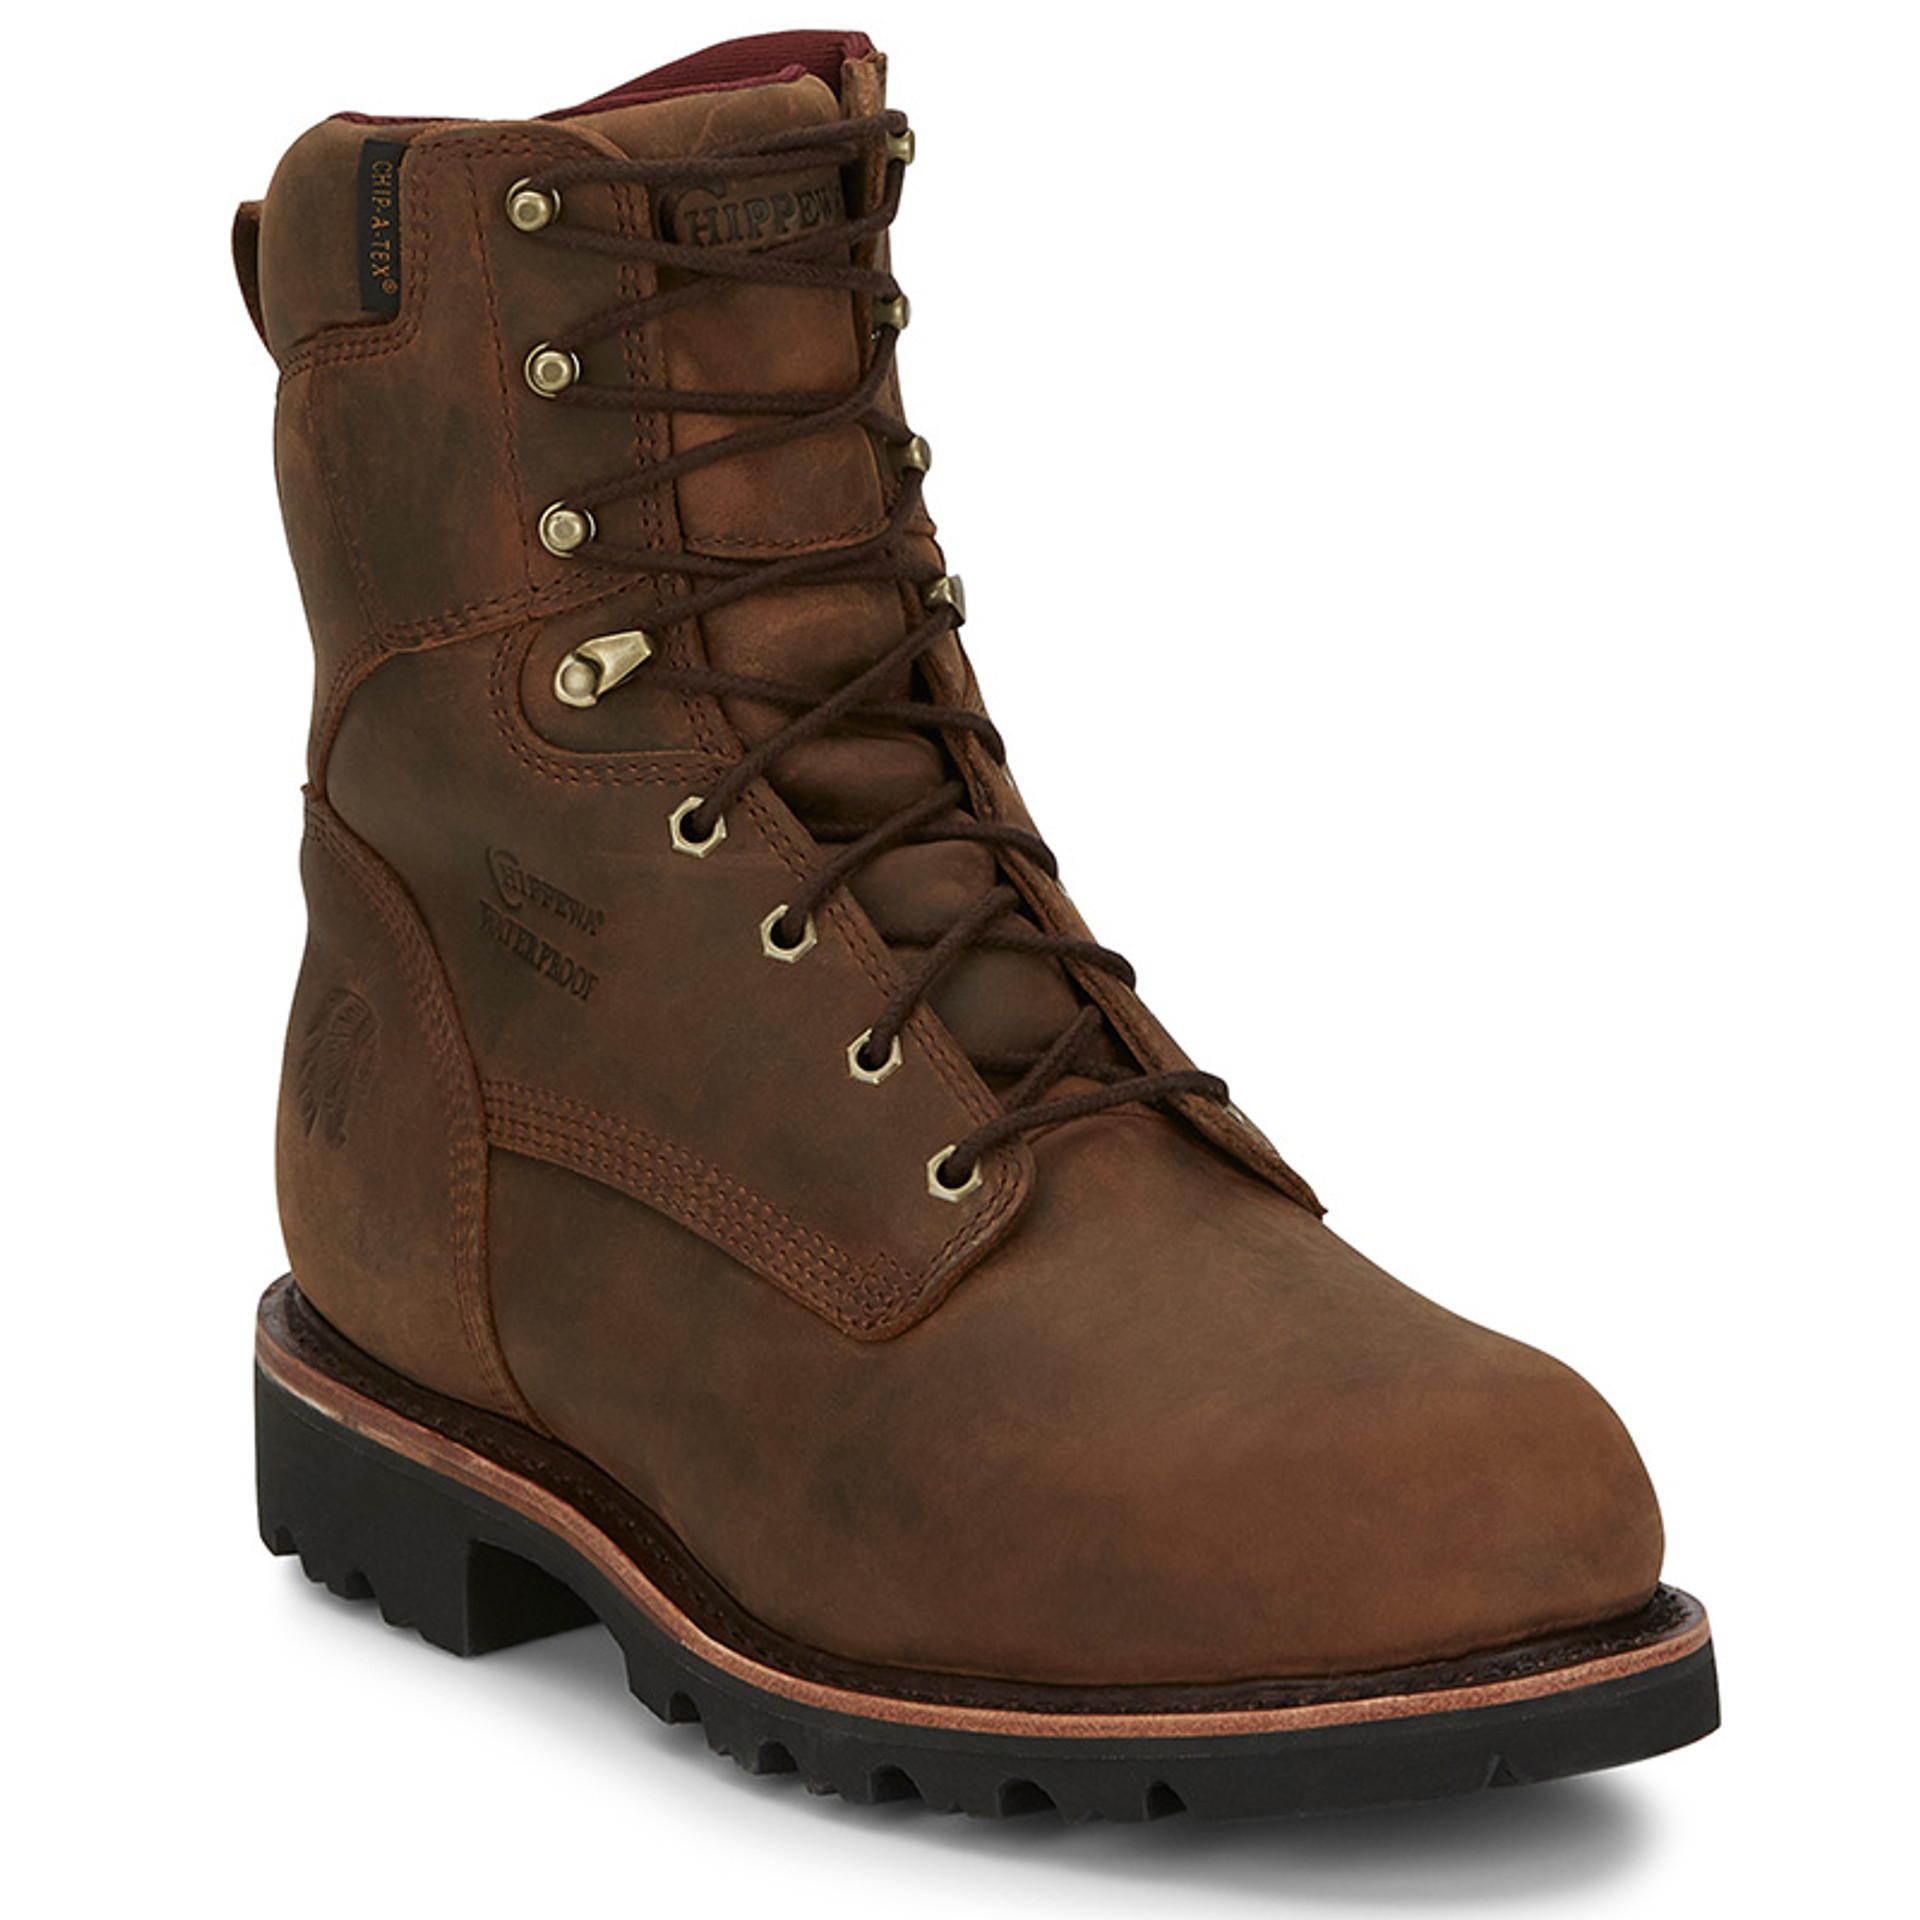 Chippewa Boots -Your Work Boot Headquarters